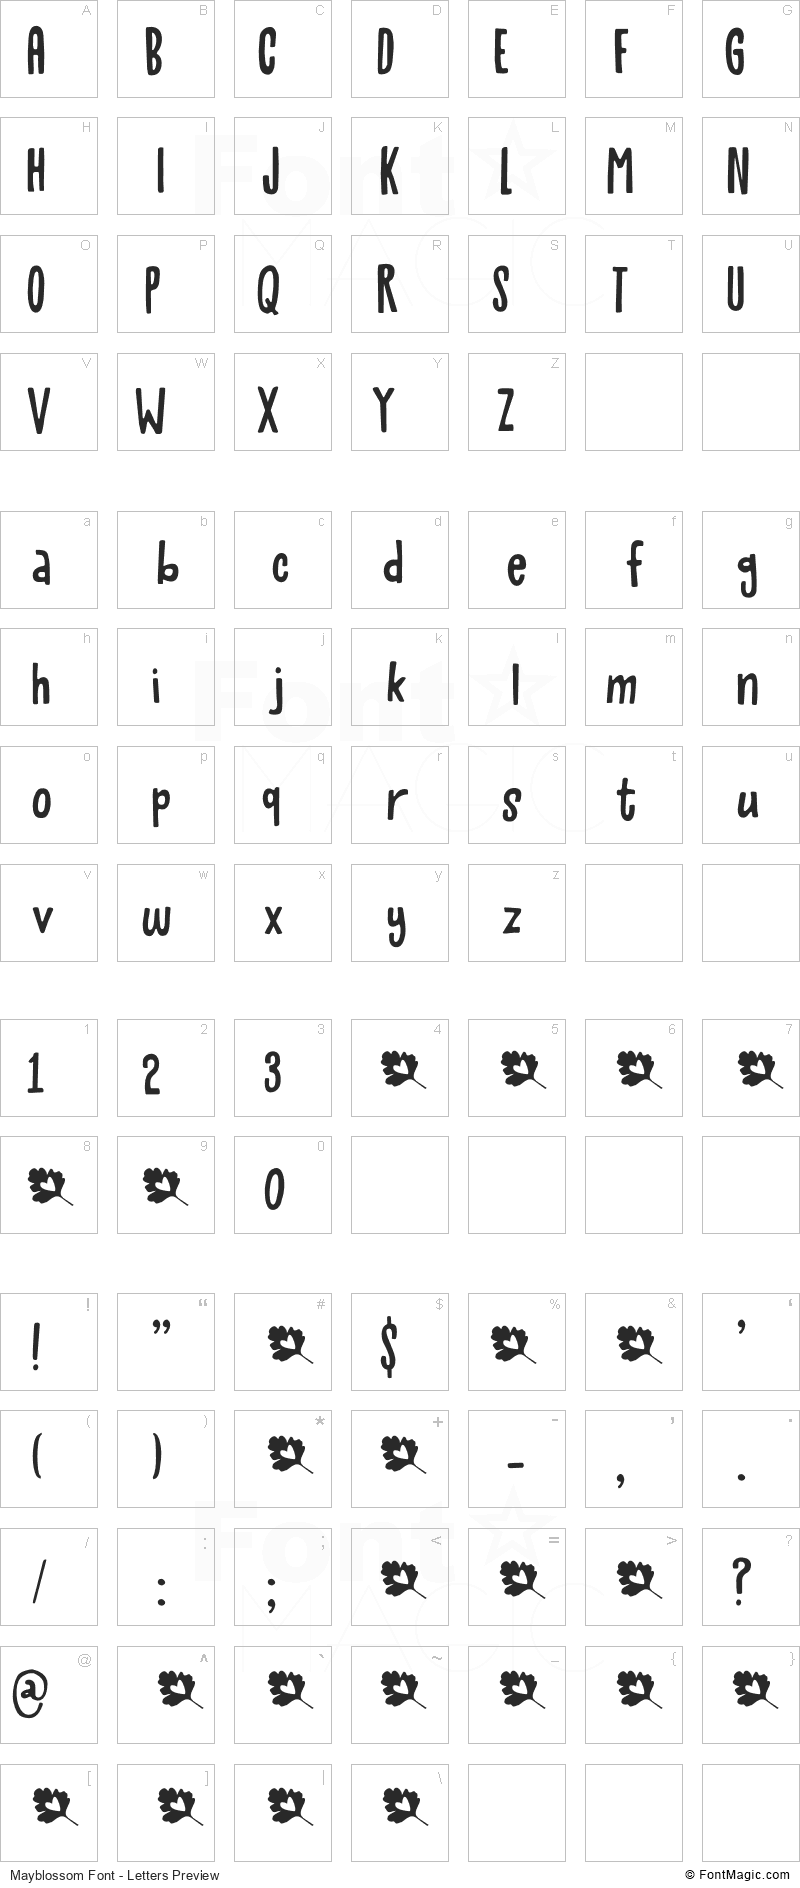 Mayblossom Font - All Latters Preview Chart